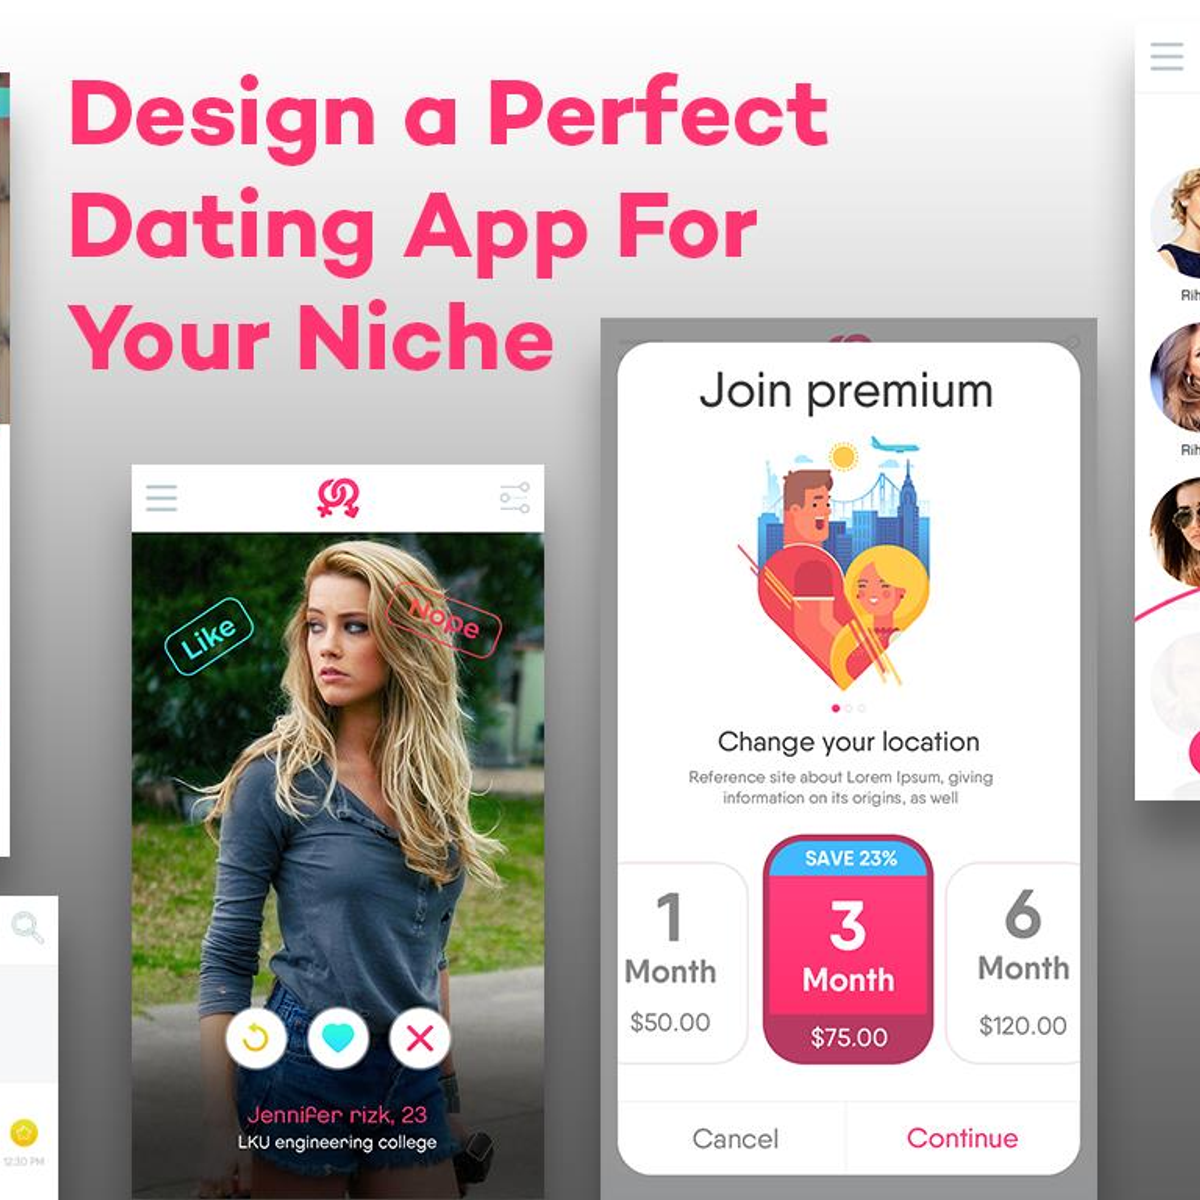 Which is the best dating app clone script website? - Quora